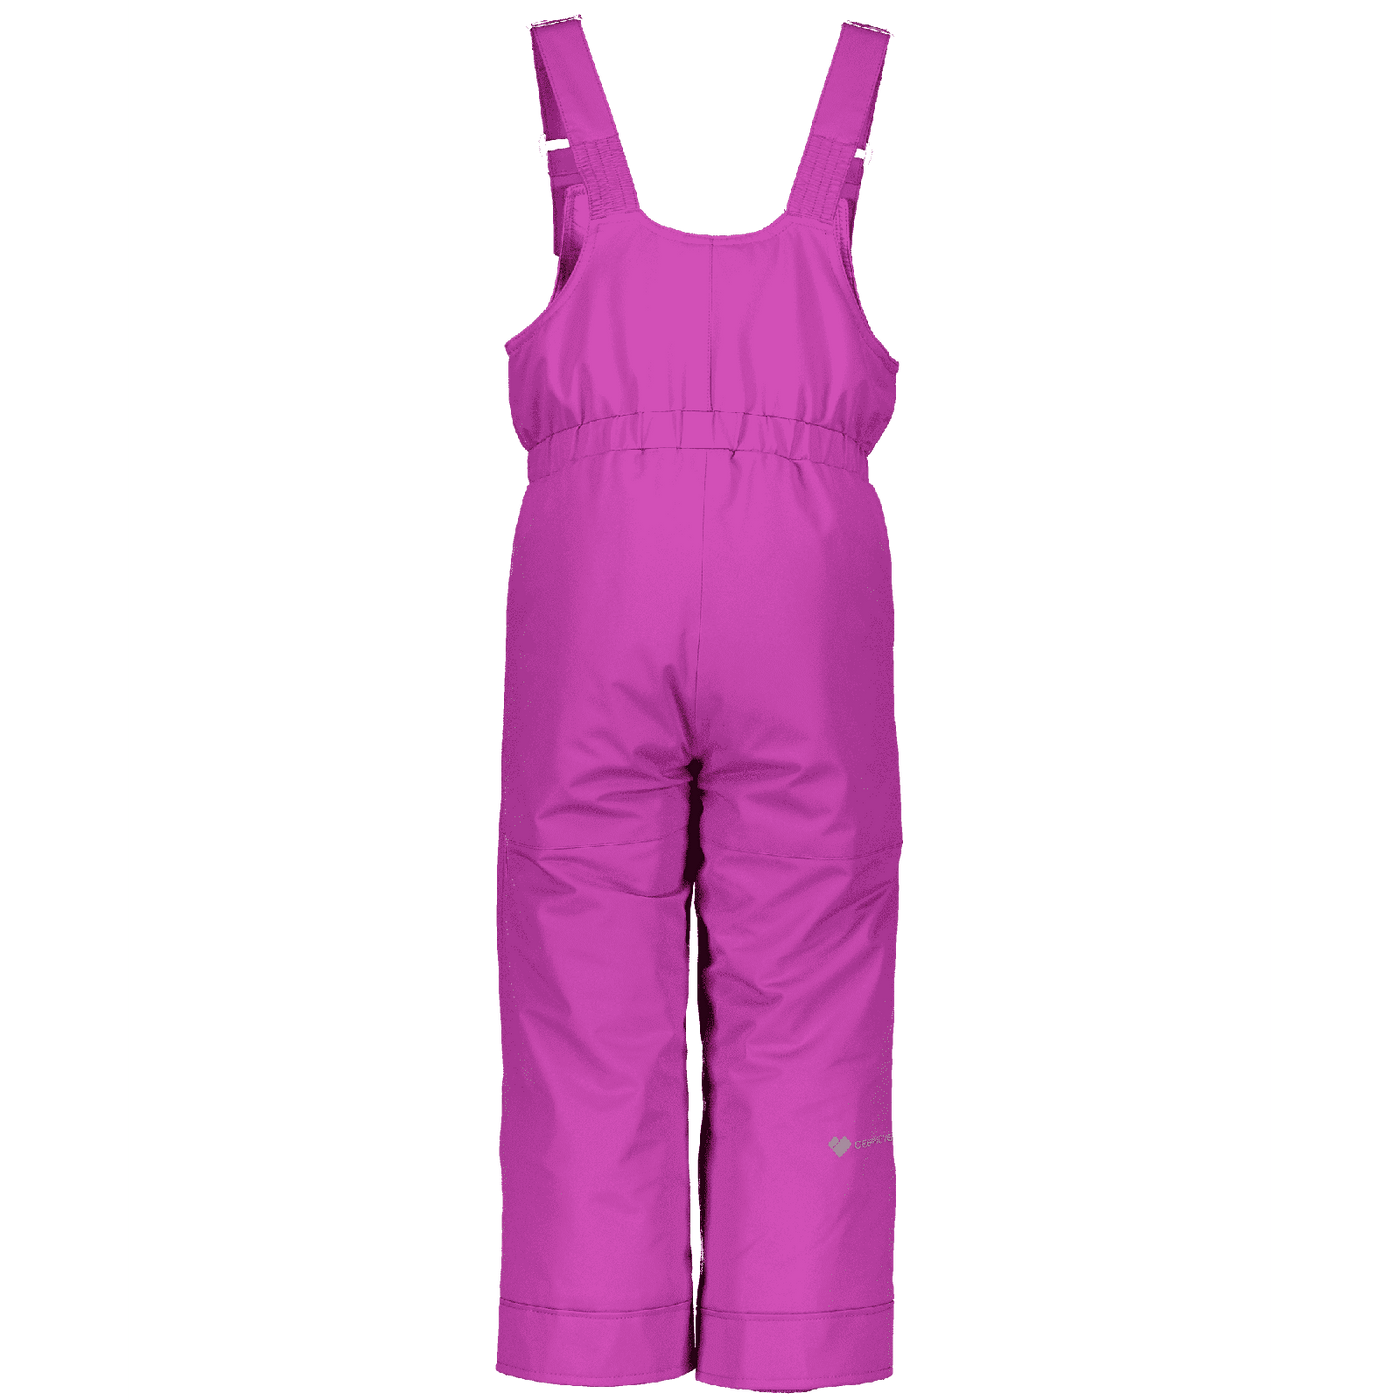 Obermeyer Outerwear Pants Obermeyer Girls Snoverall Pant - Prickly Pear